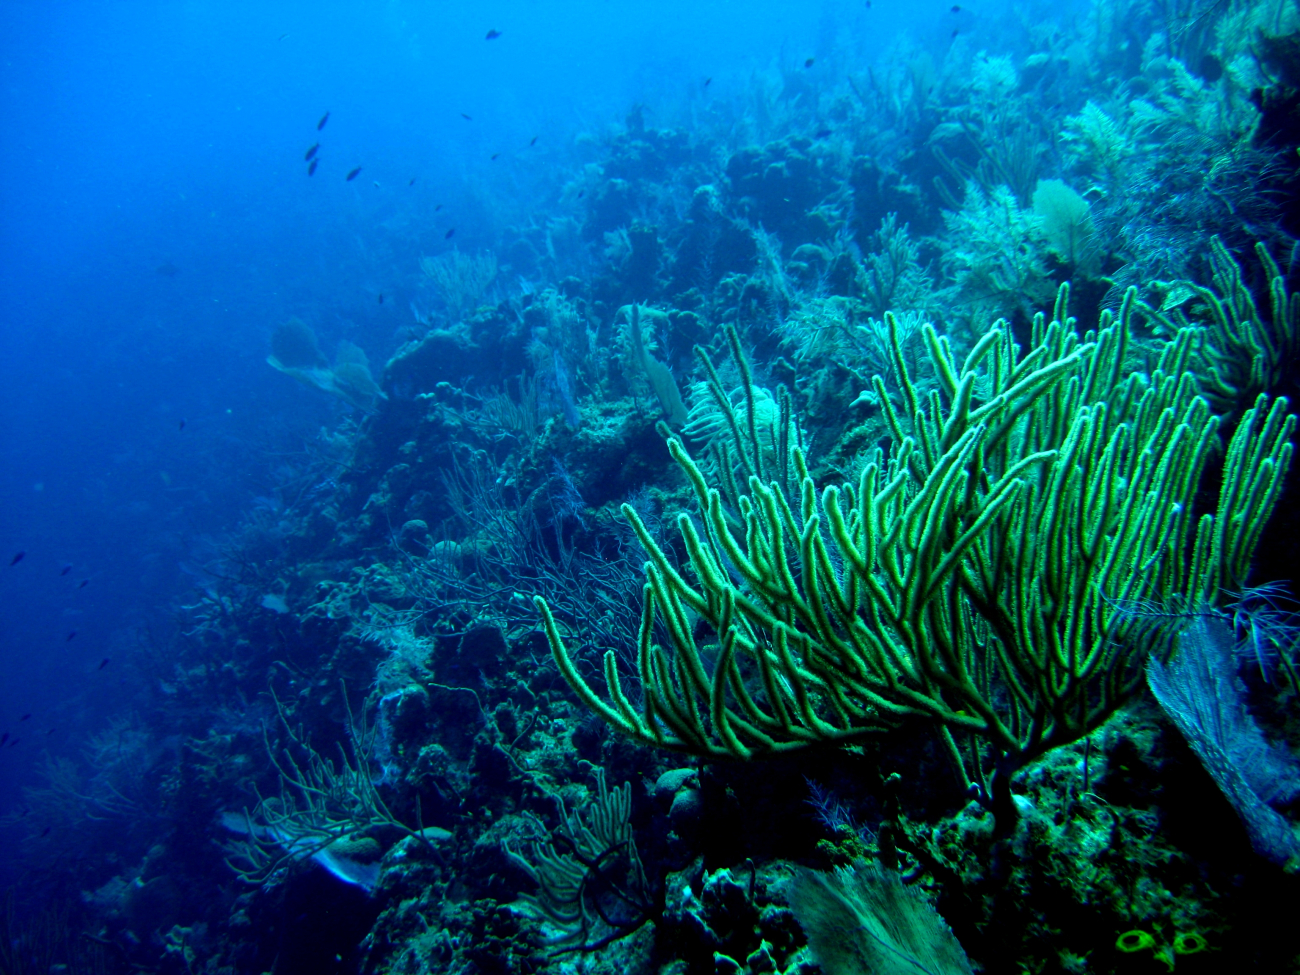 A reef scene on a steep slope